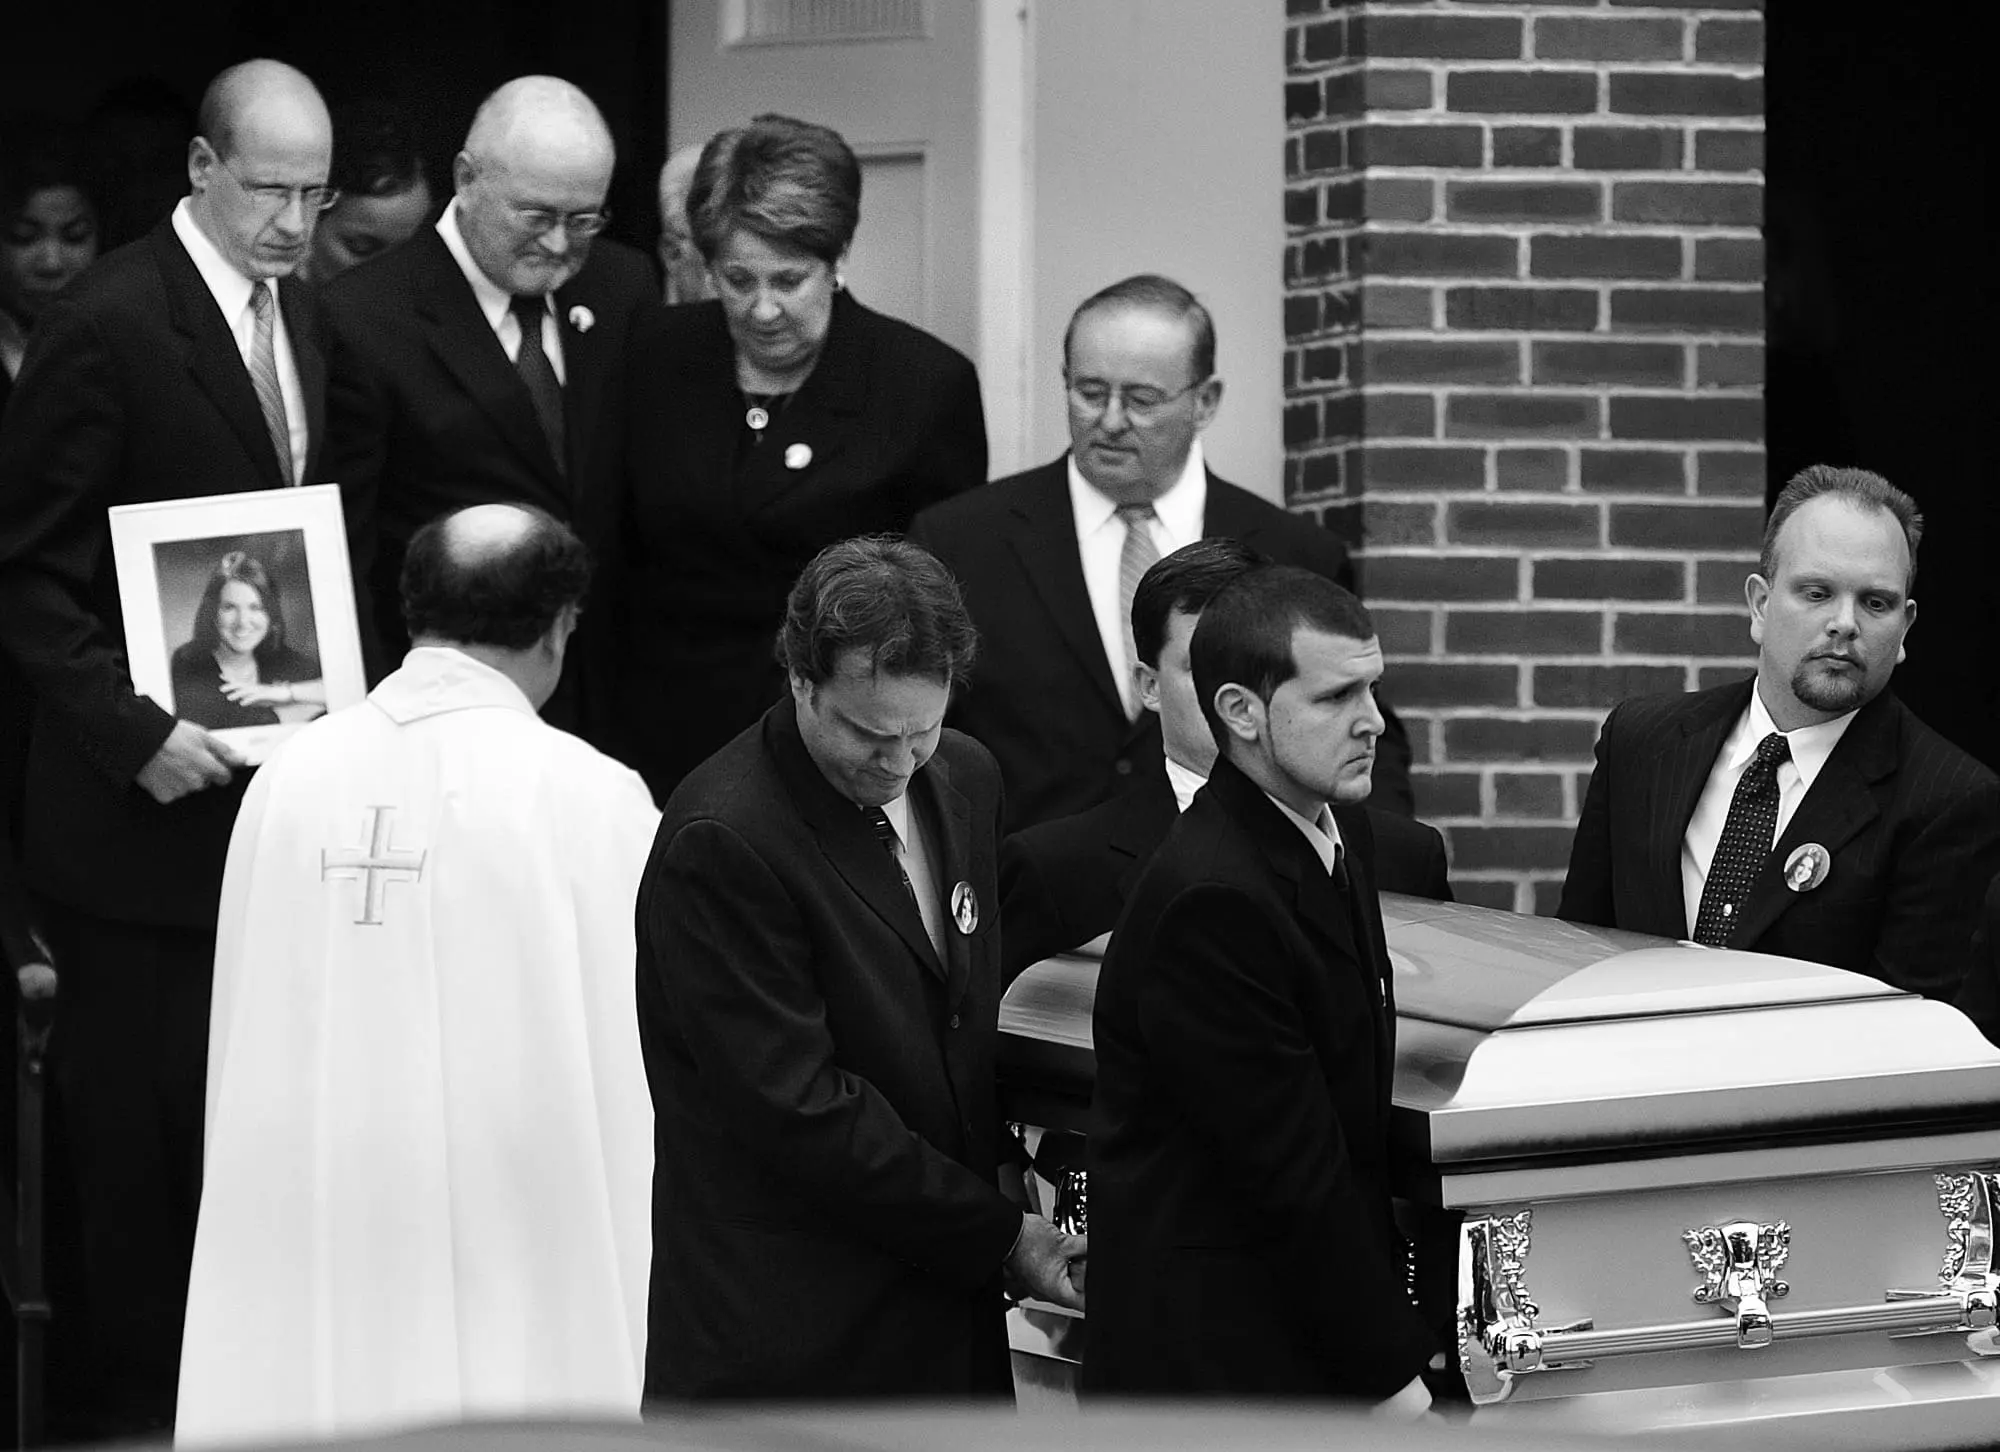 Victoria Snelgrove's family follows her casket out of St. John's Catholic church in East Bridgewater, Mass. after her funeral on Tuesday, Oct. 26, 2004.